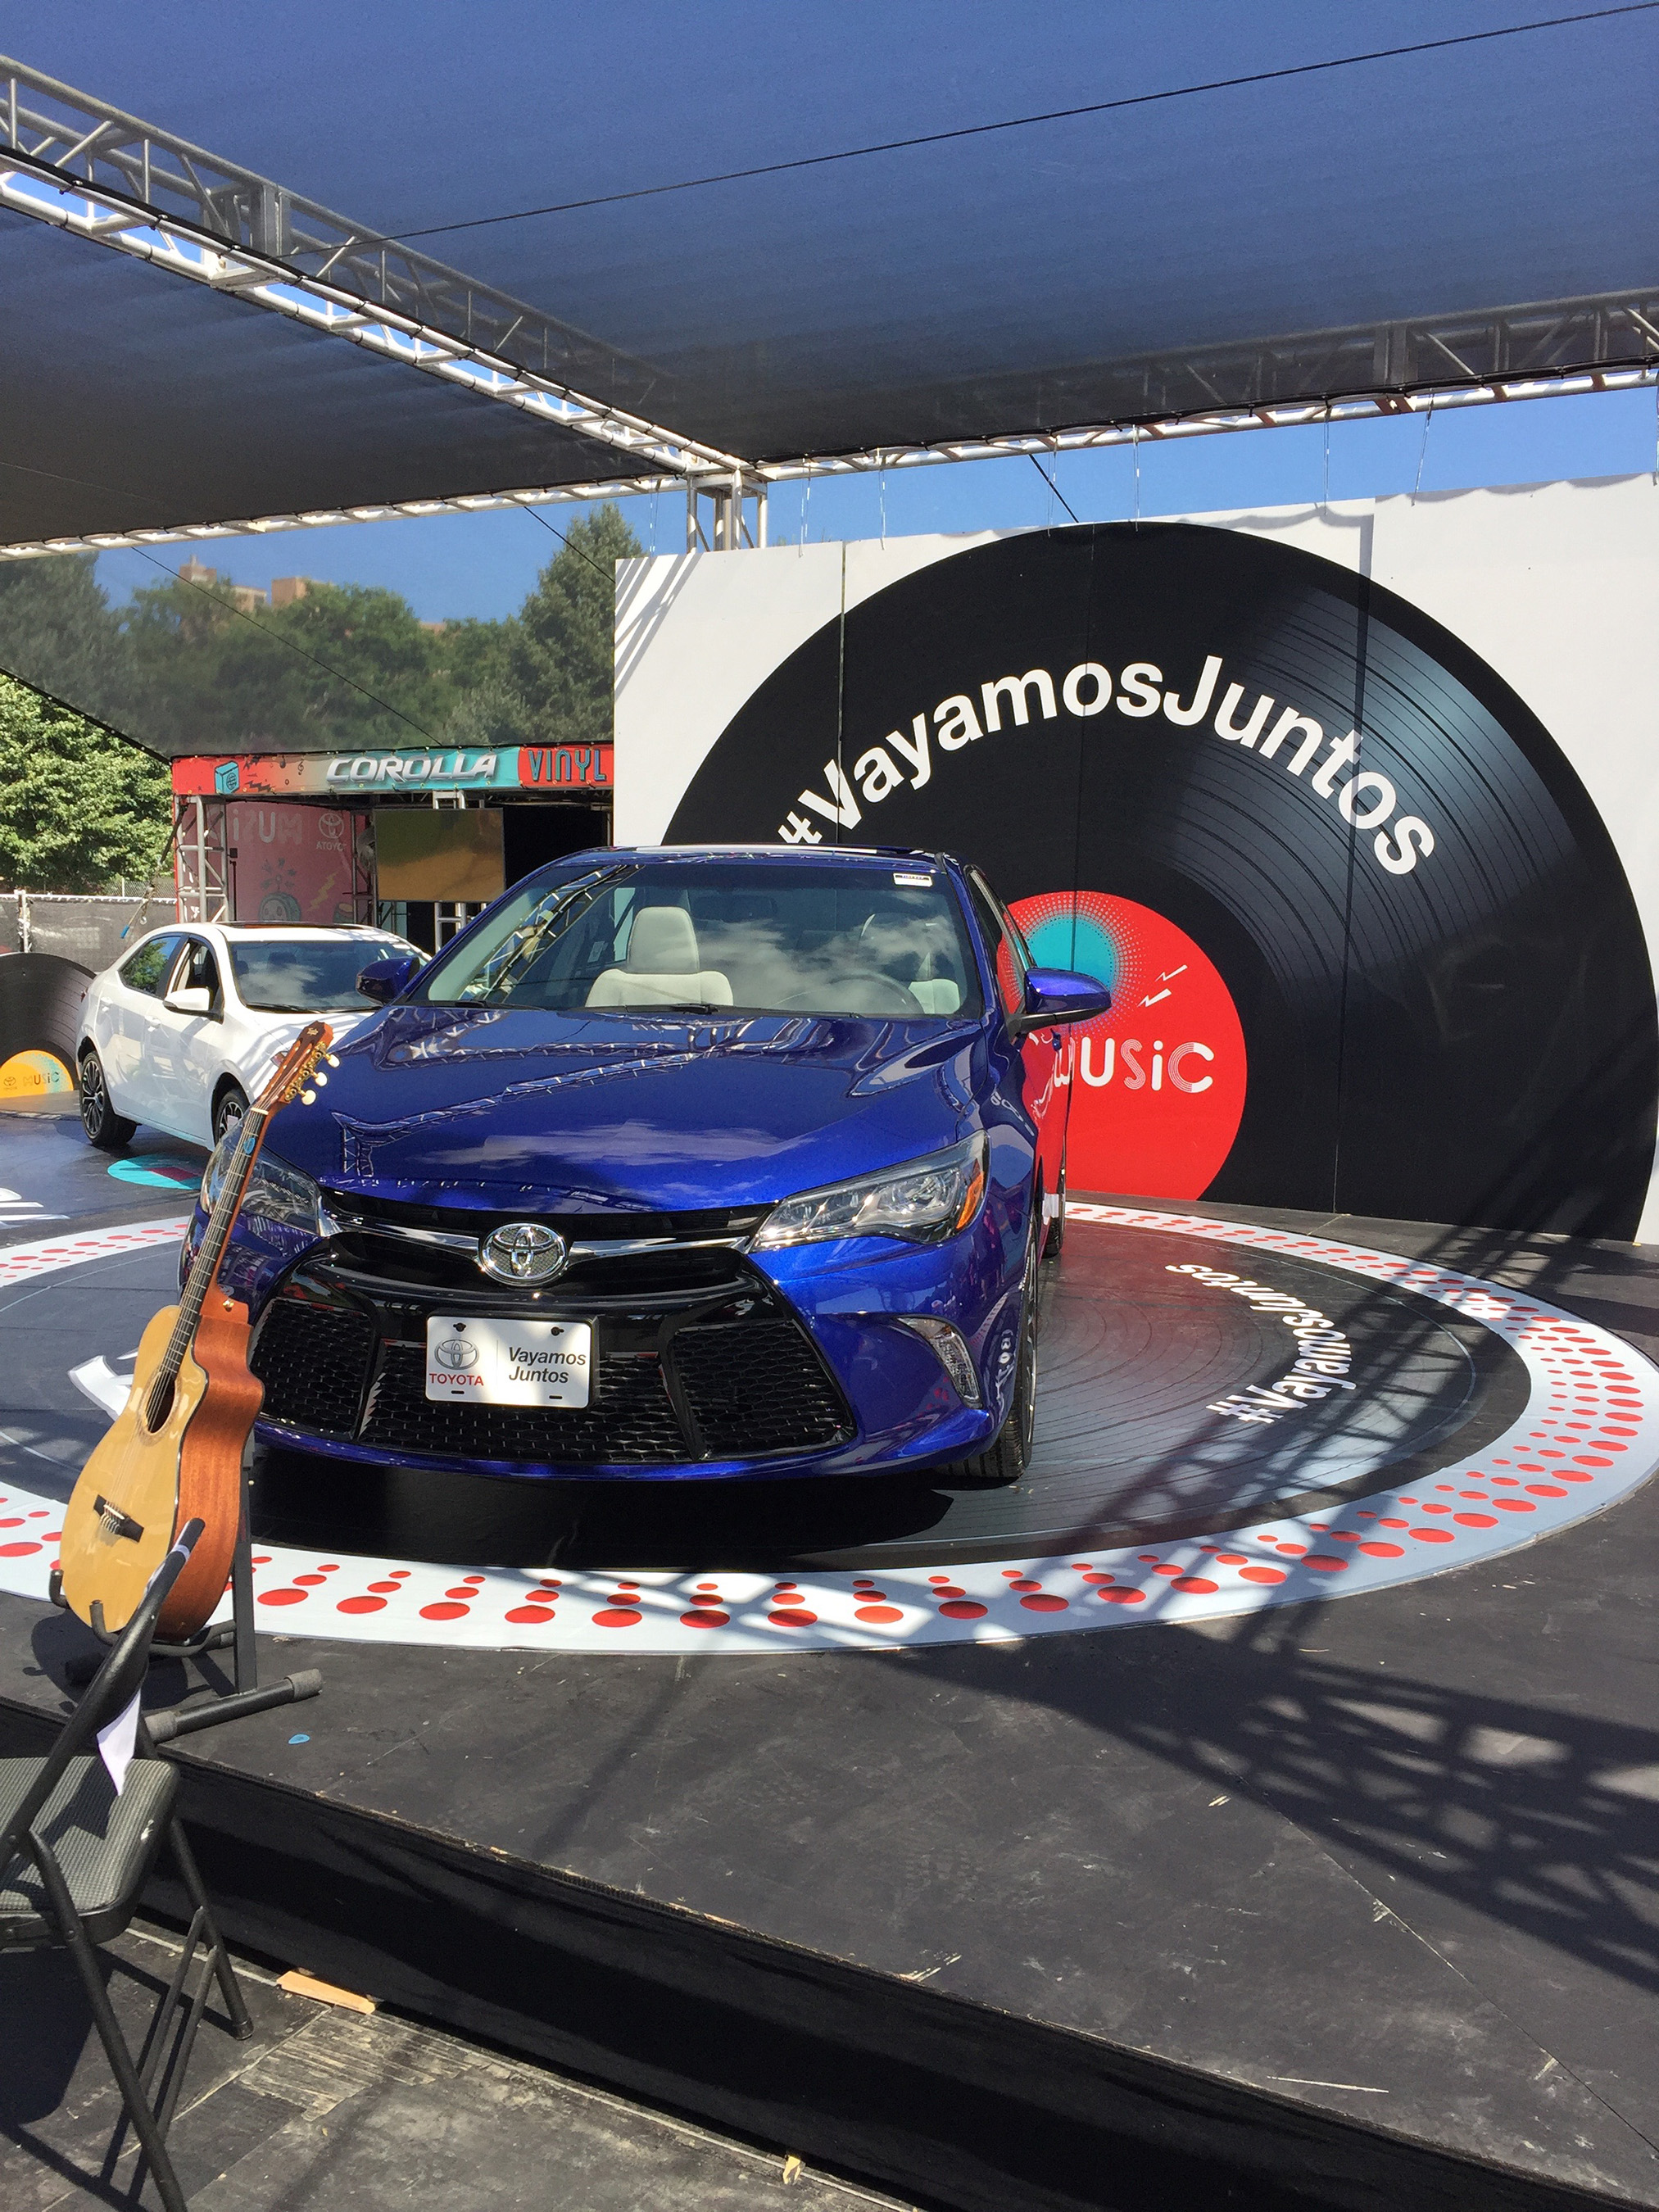 Toyota joined the Ruido Fest music action with an engaging and interactive area where the stars of the show were the bold Camry, the all new Prius, the RAV4 Hybrid and the Corolla.